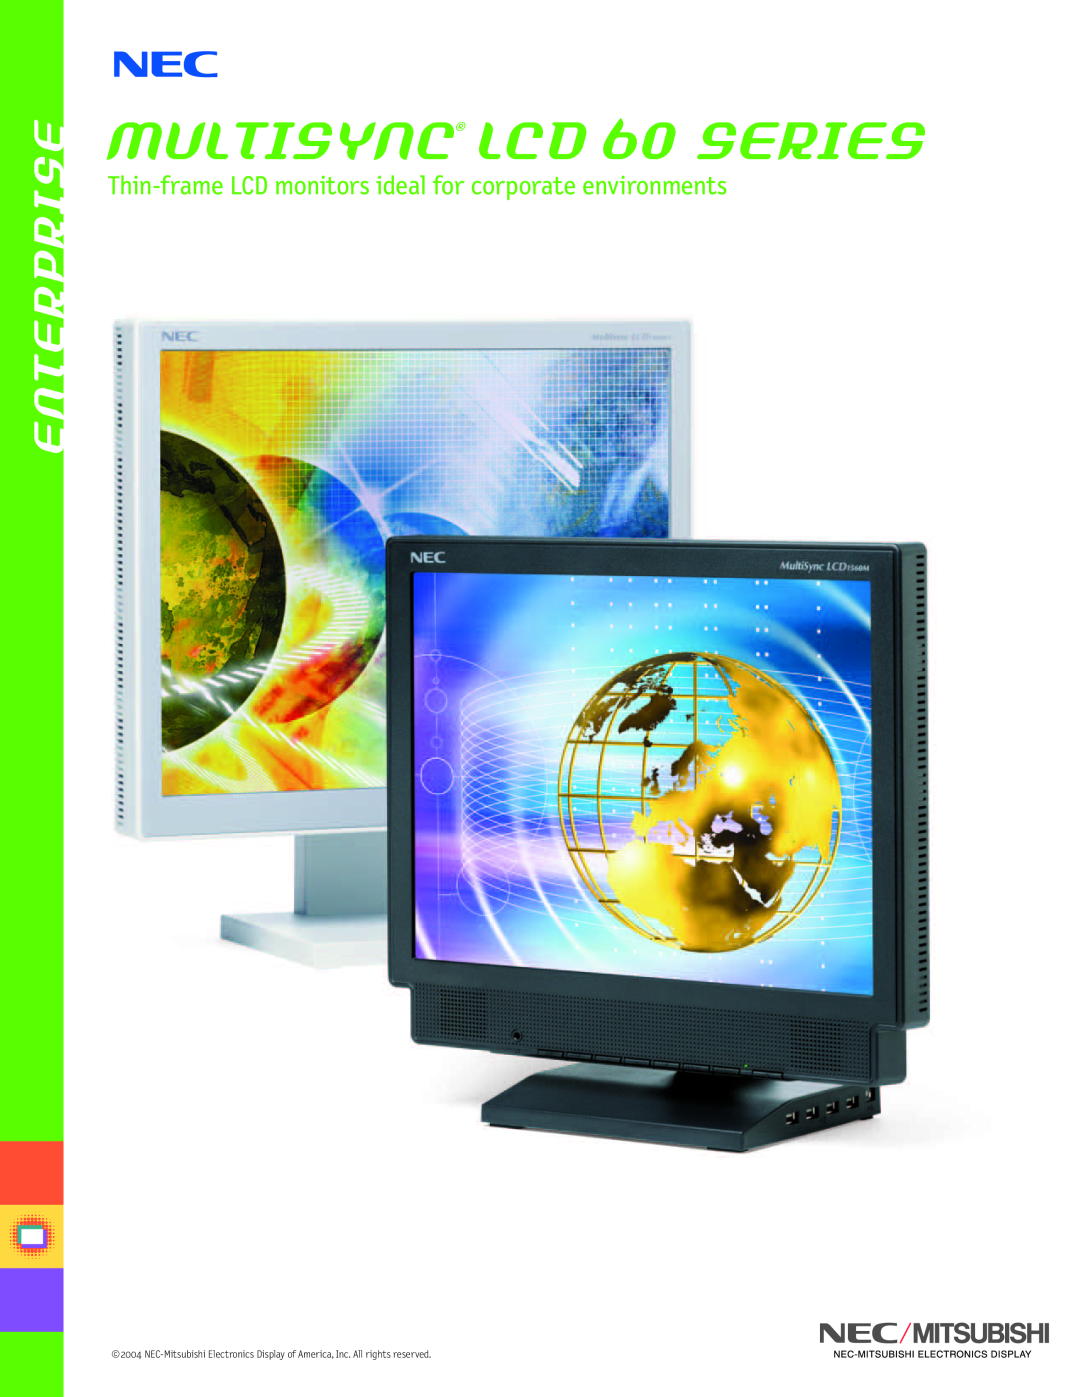 NEC manual MultiSync LCD60 Series, Enterprise, Thin-frame LCD monitors ideal for corporate environments 